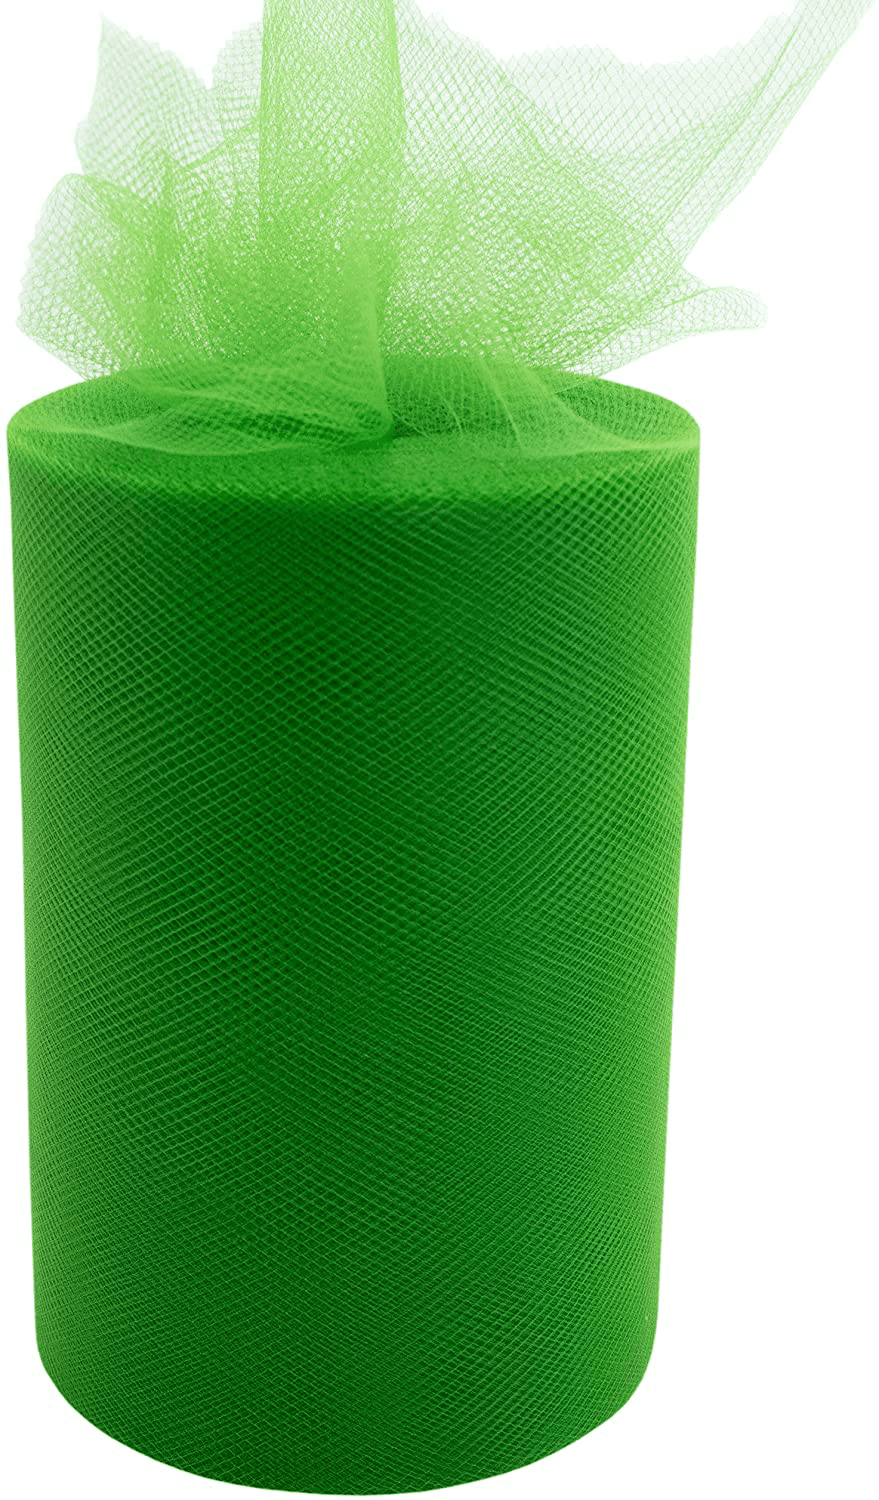 6"x100 Yards Tulle Roll Spool Tutu Wedding Gifts Craft Party Decor Fabric Supply 